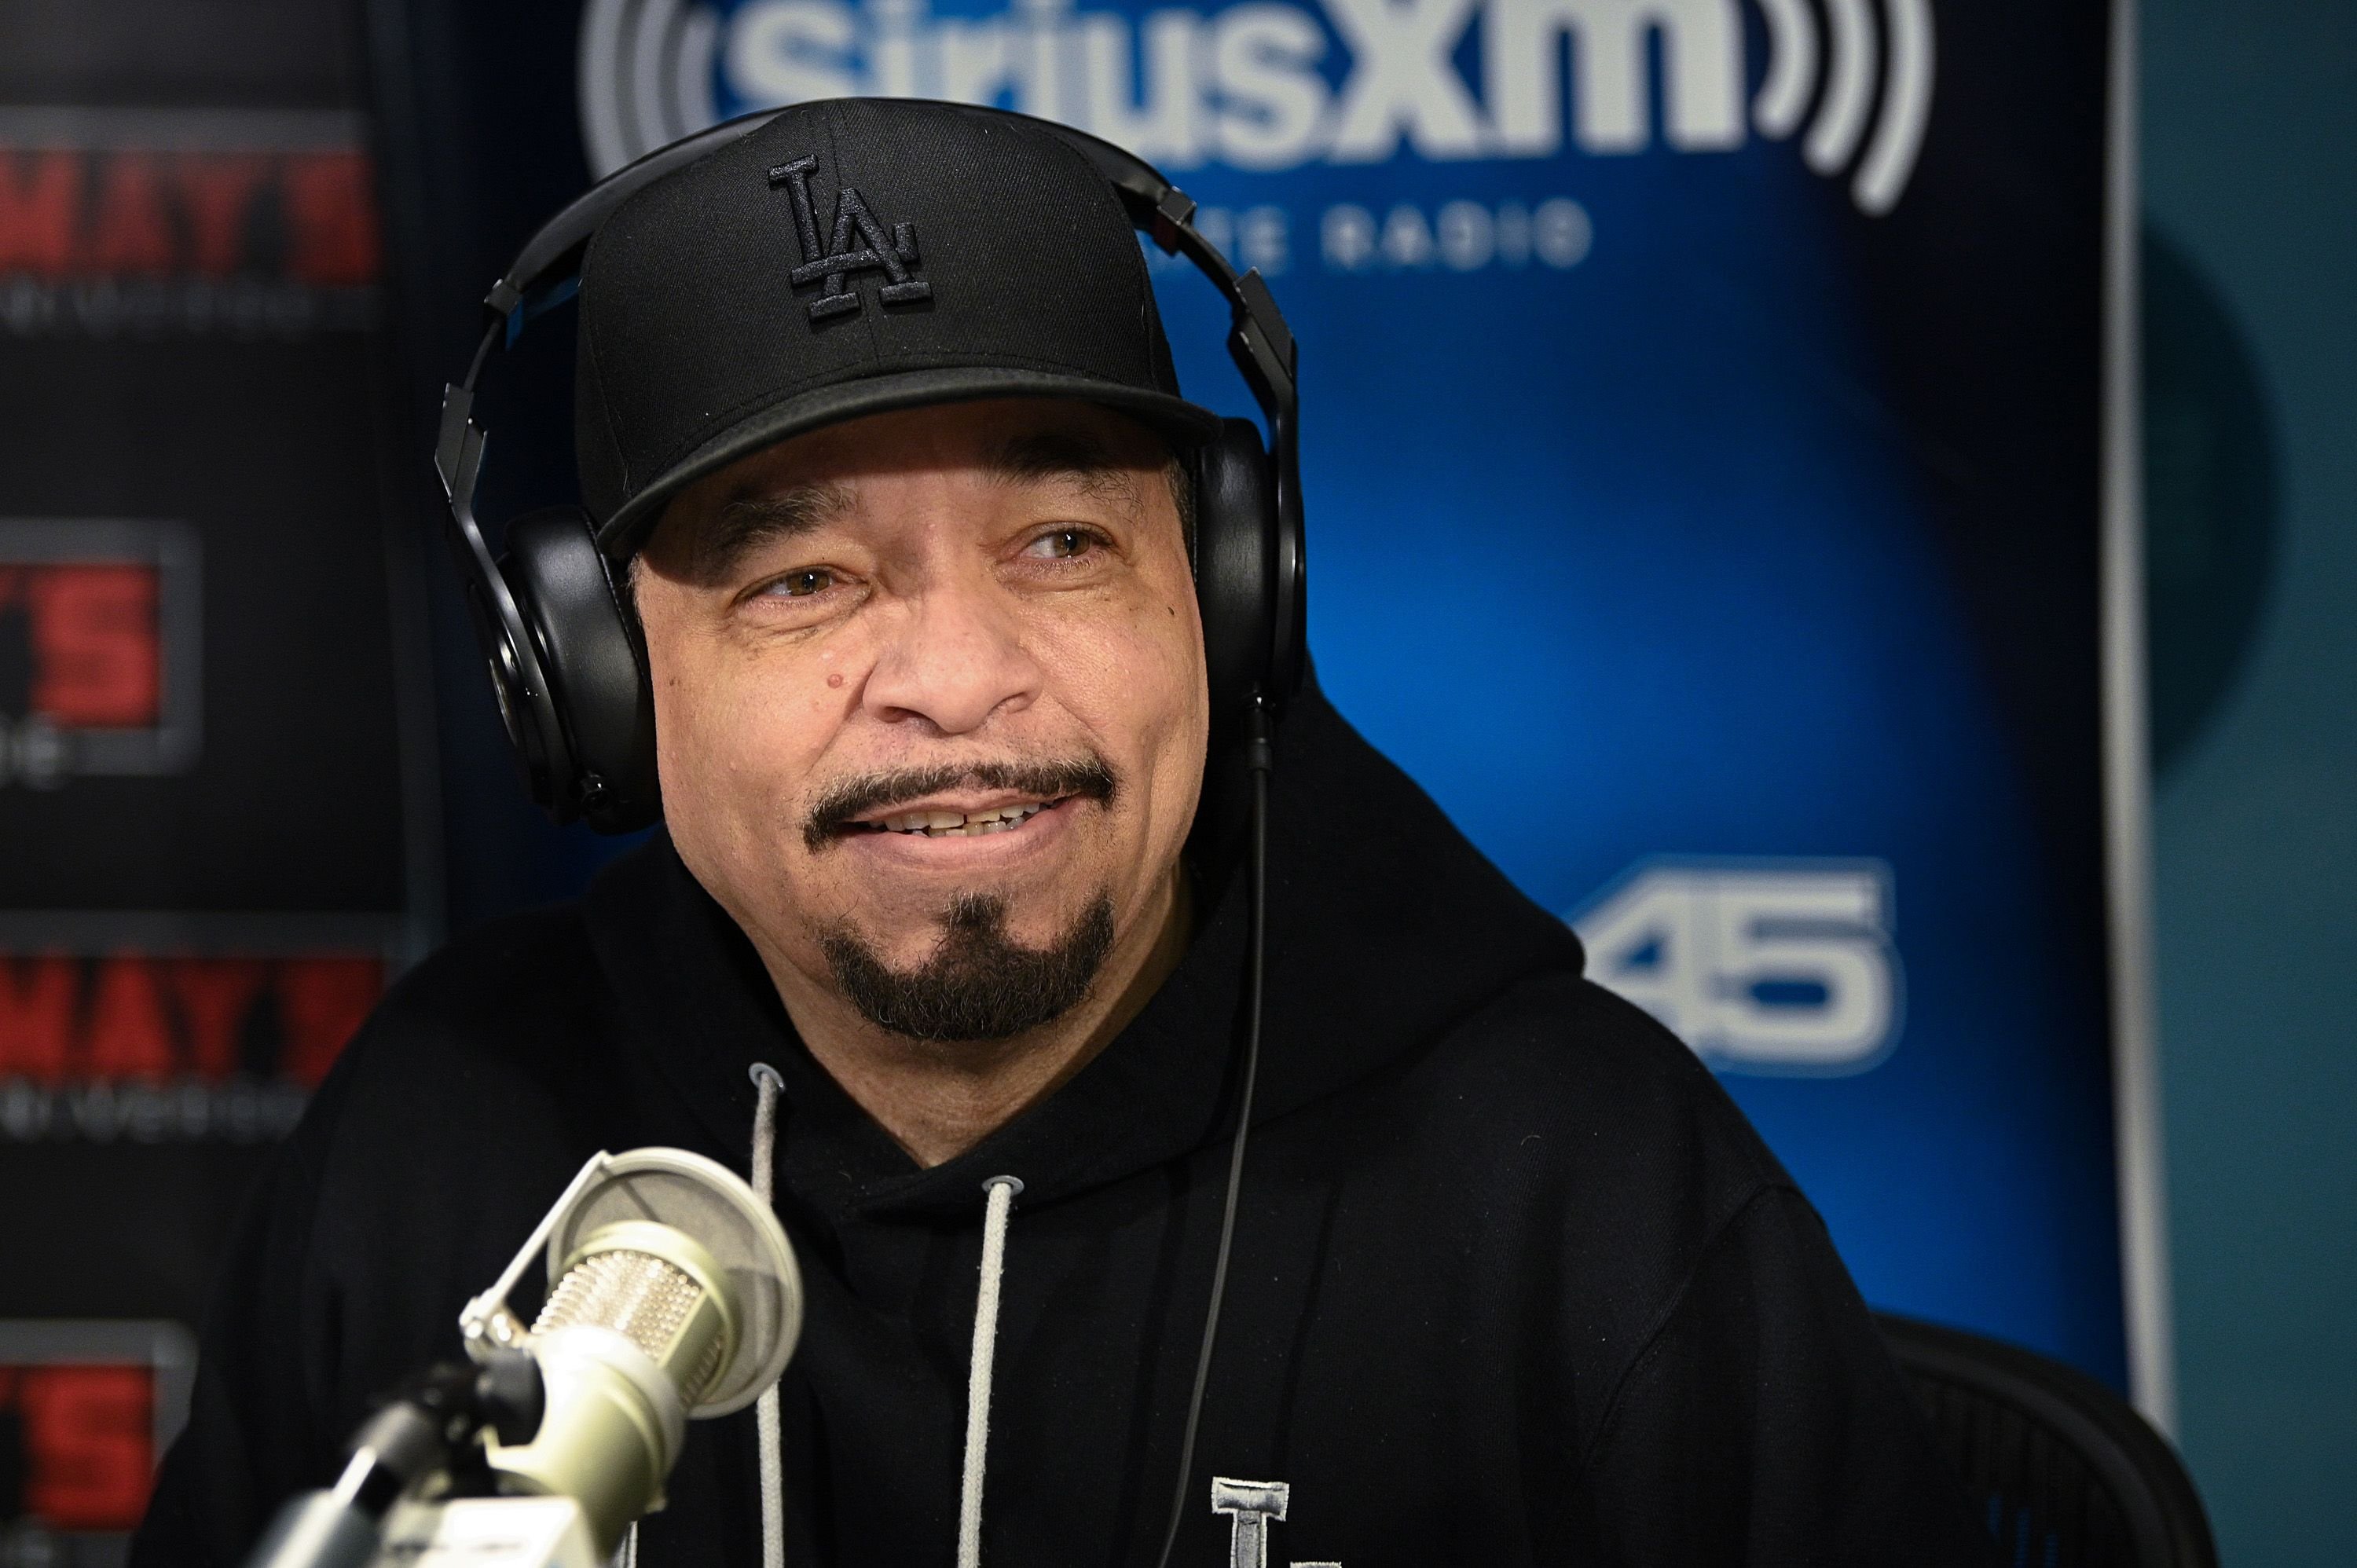 Ice-T visits SiriusXM Studios on February 18, 2020, in New York City | Photo: Dia Dipasupil/Getty Images